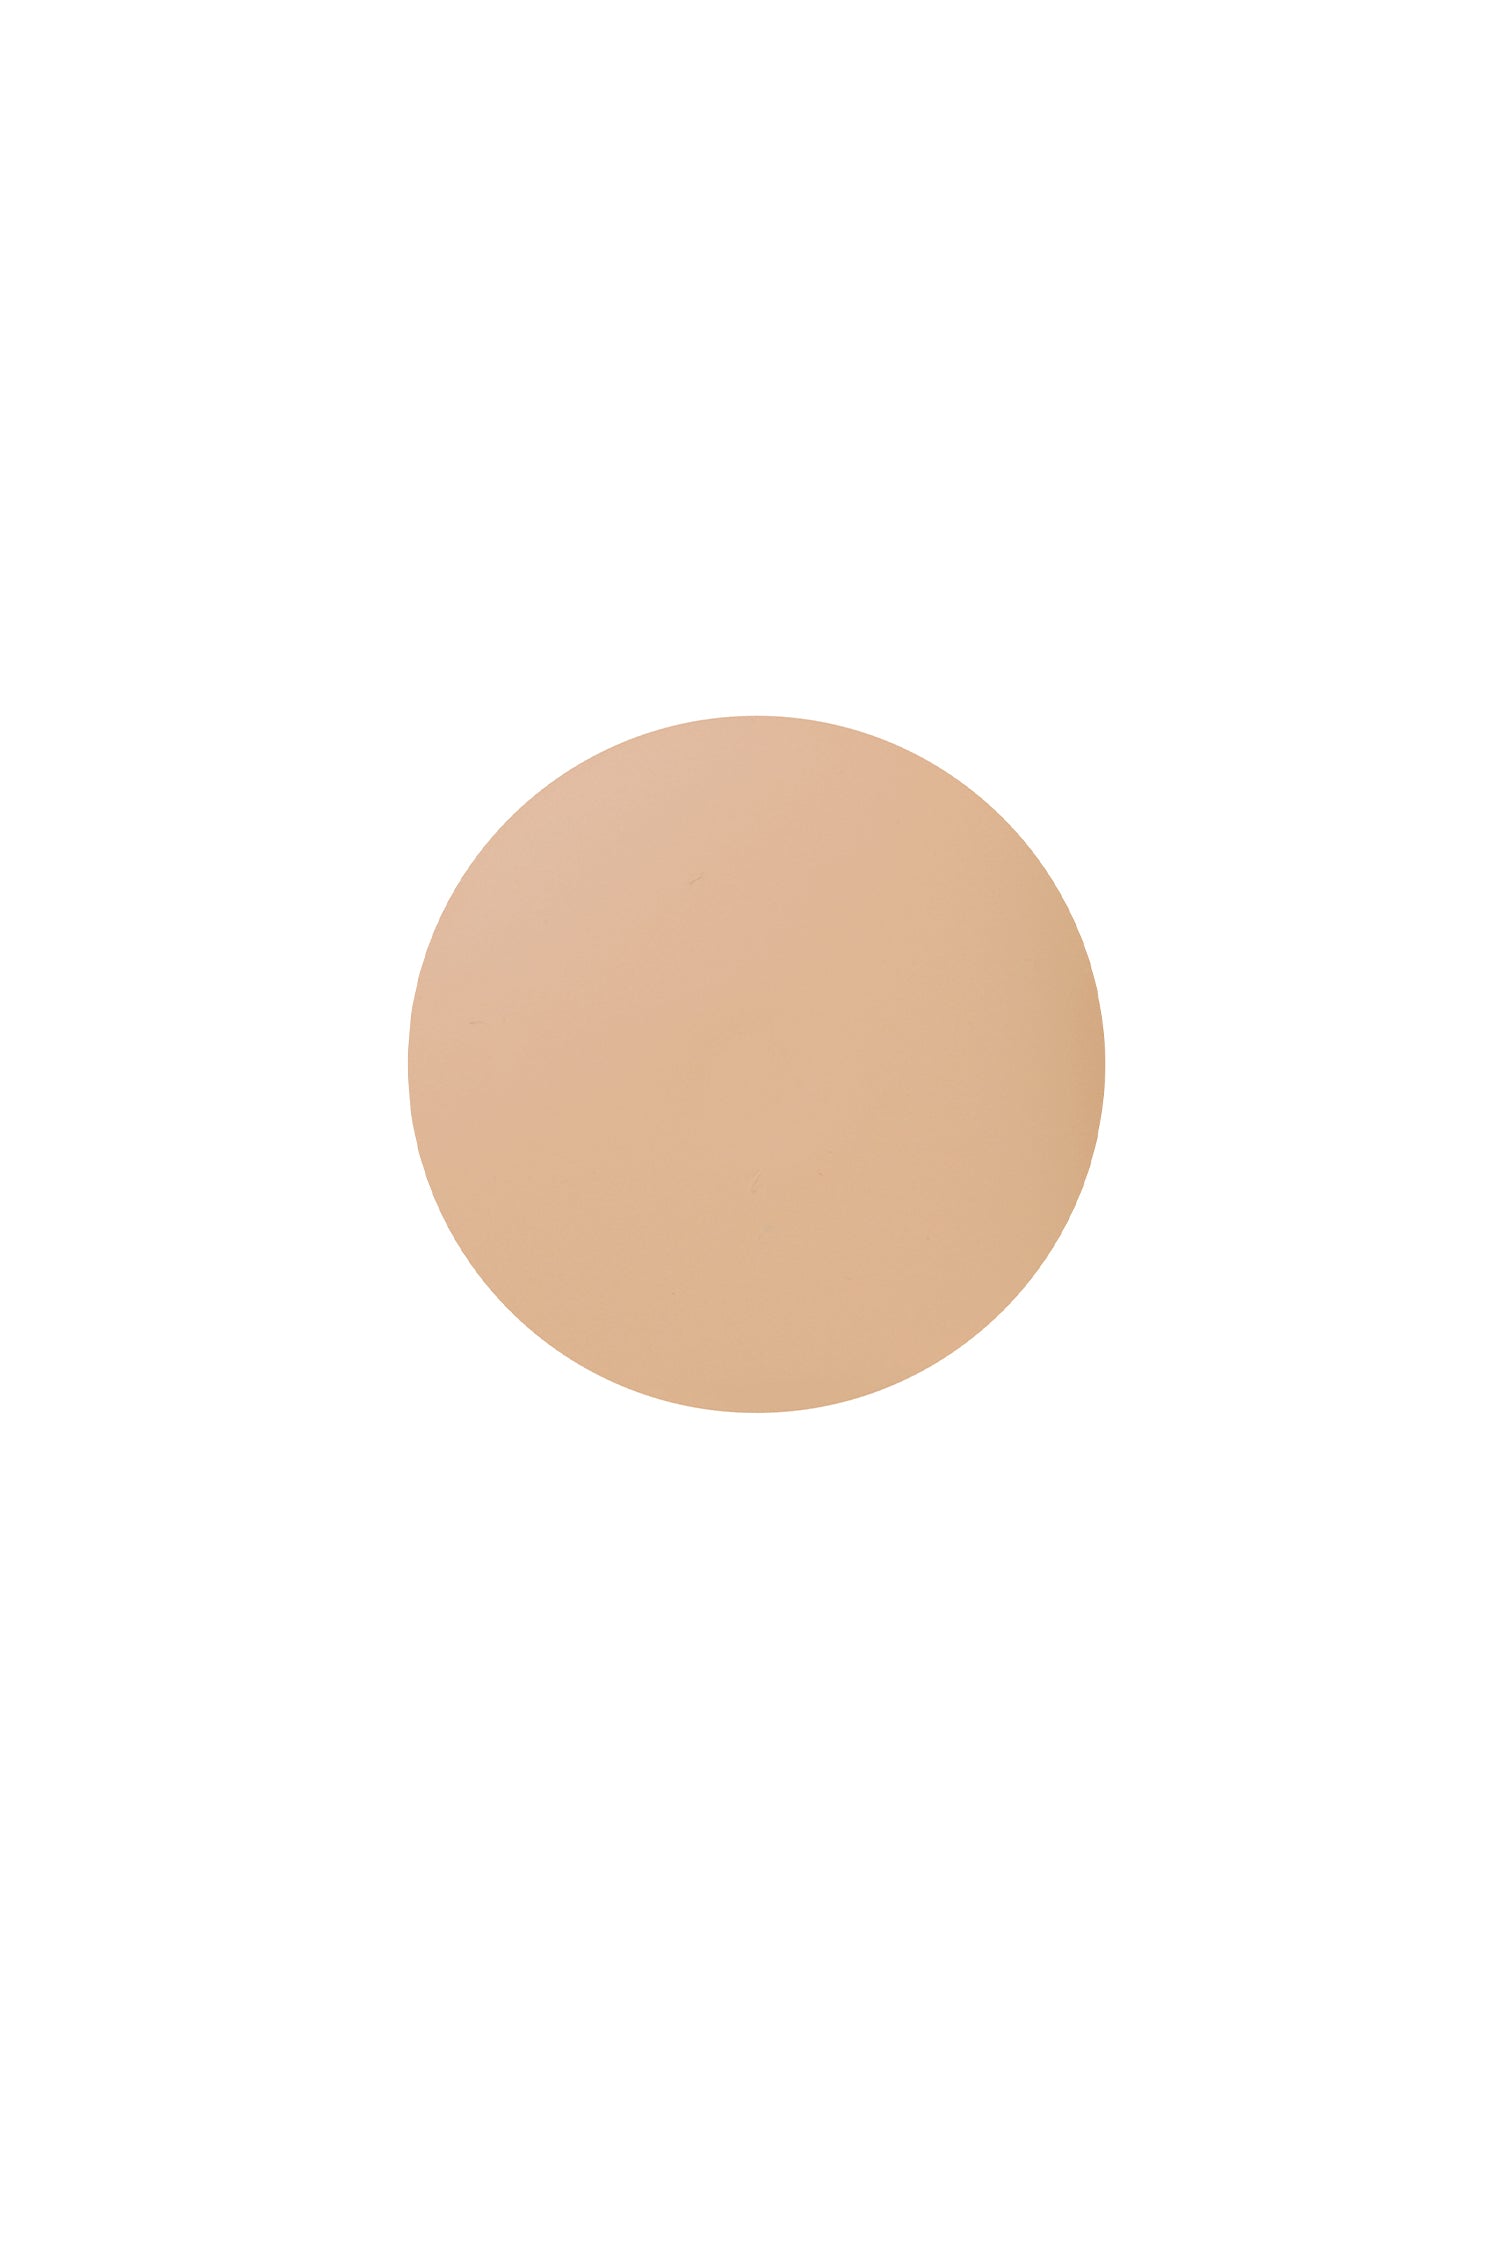 Introducing our newest LIGHT foundation compact refill, that will create a flawless doll-like look